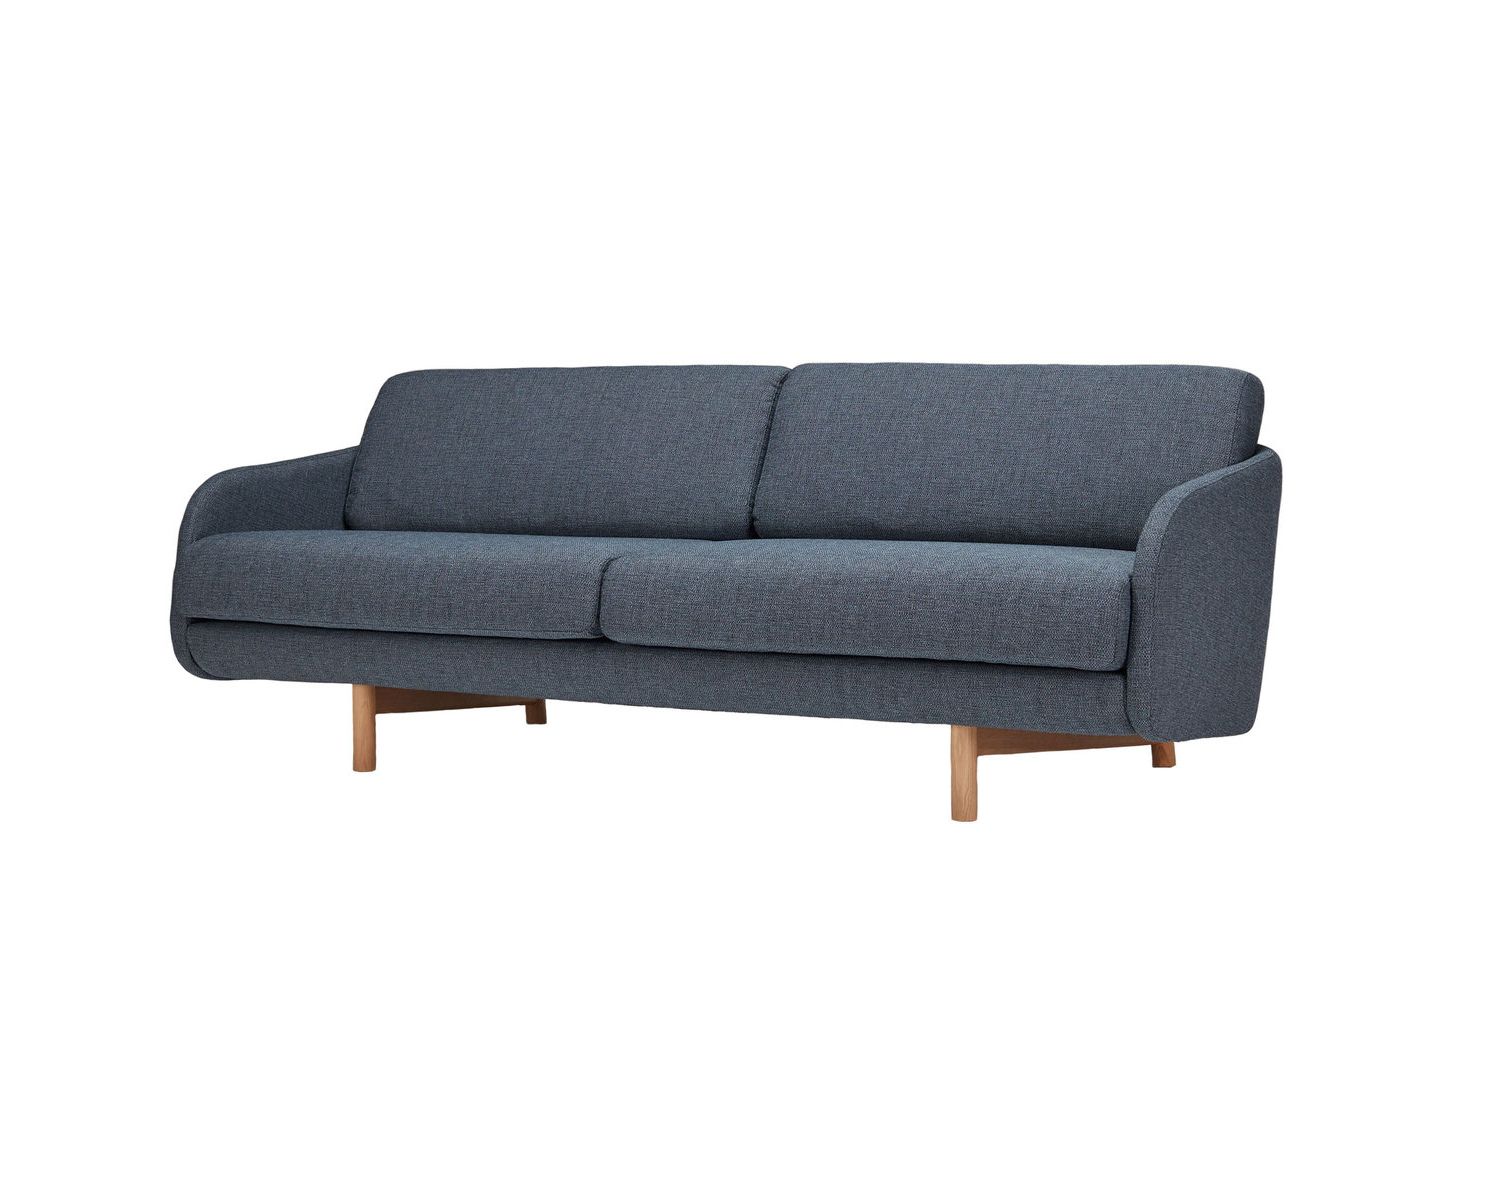 Popular Kari Loveseats With Sunbrella Cushions In Kragelund Couch Tved (View 13 of 25)